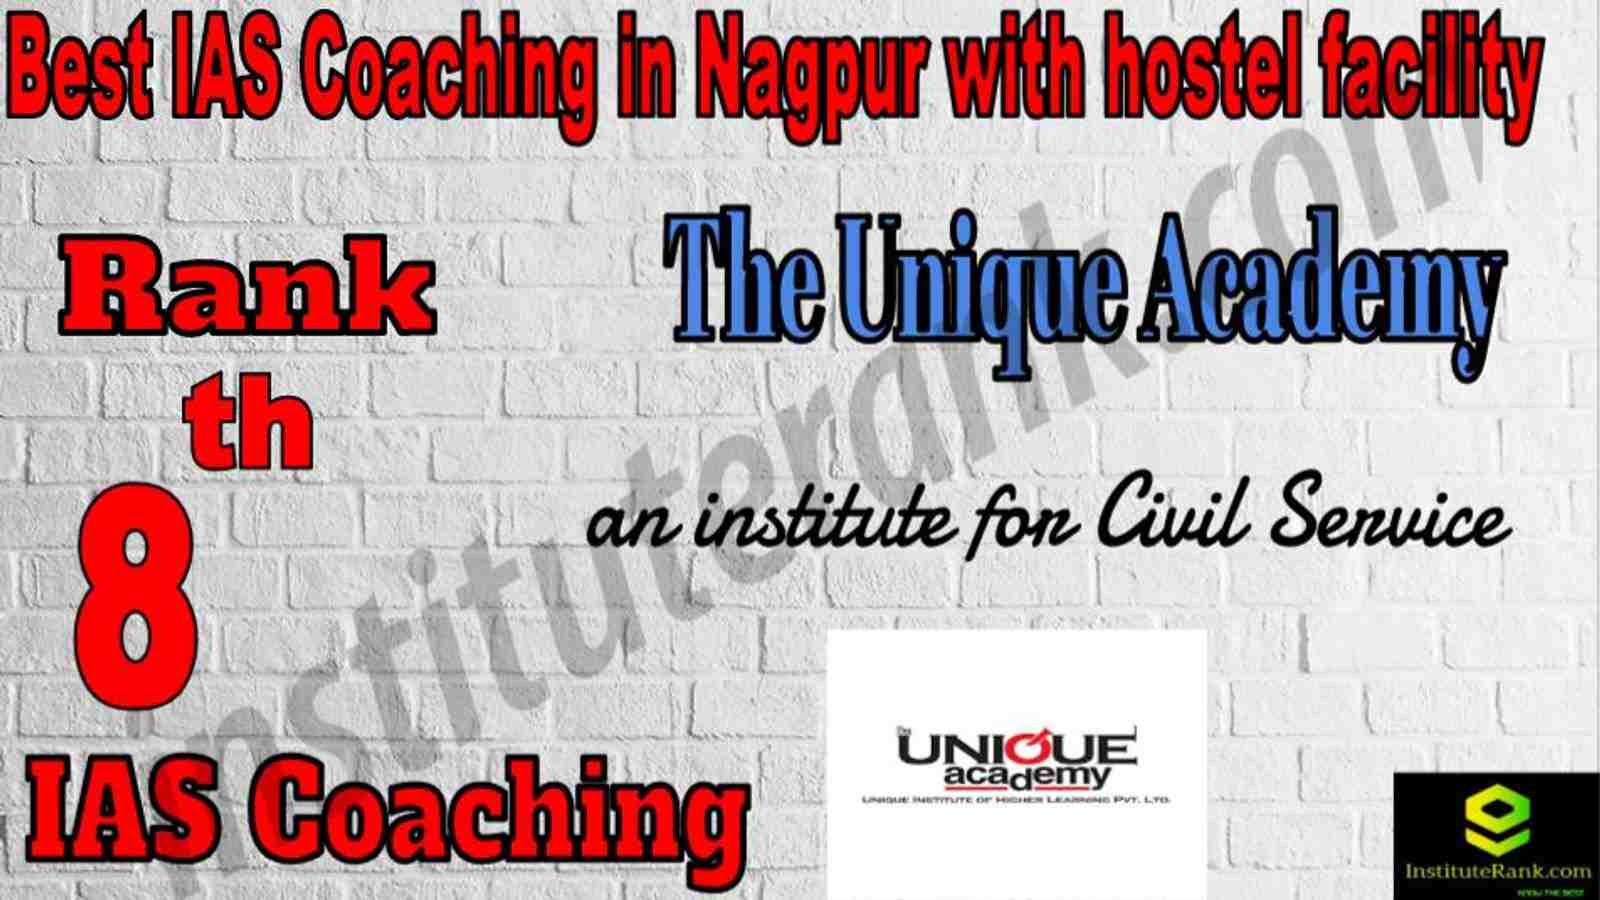 8th Best IAS Coaching in Nagpur with hostel facility